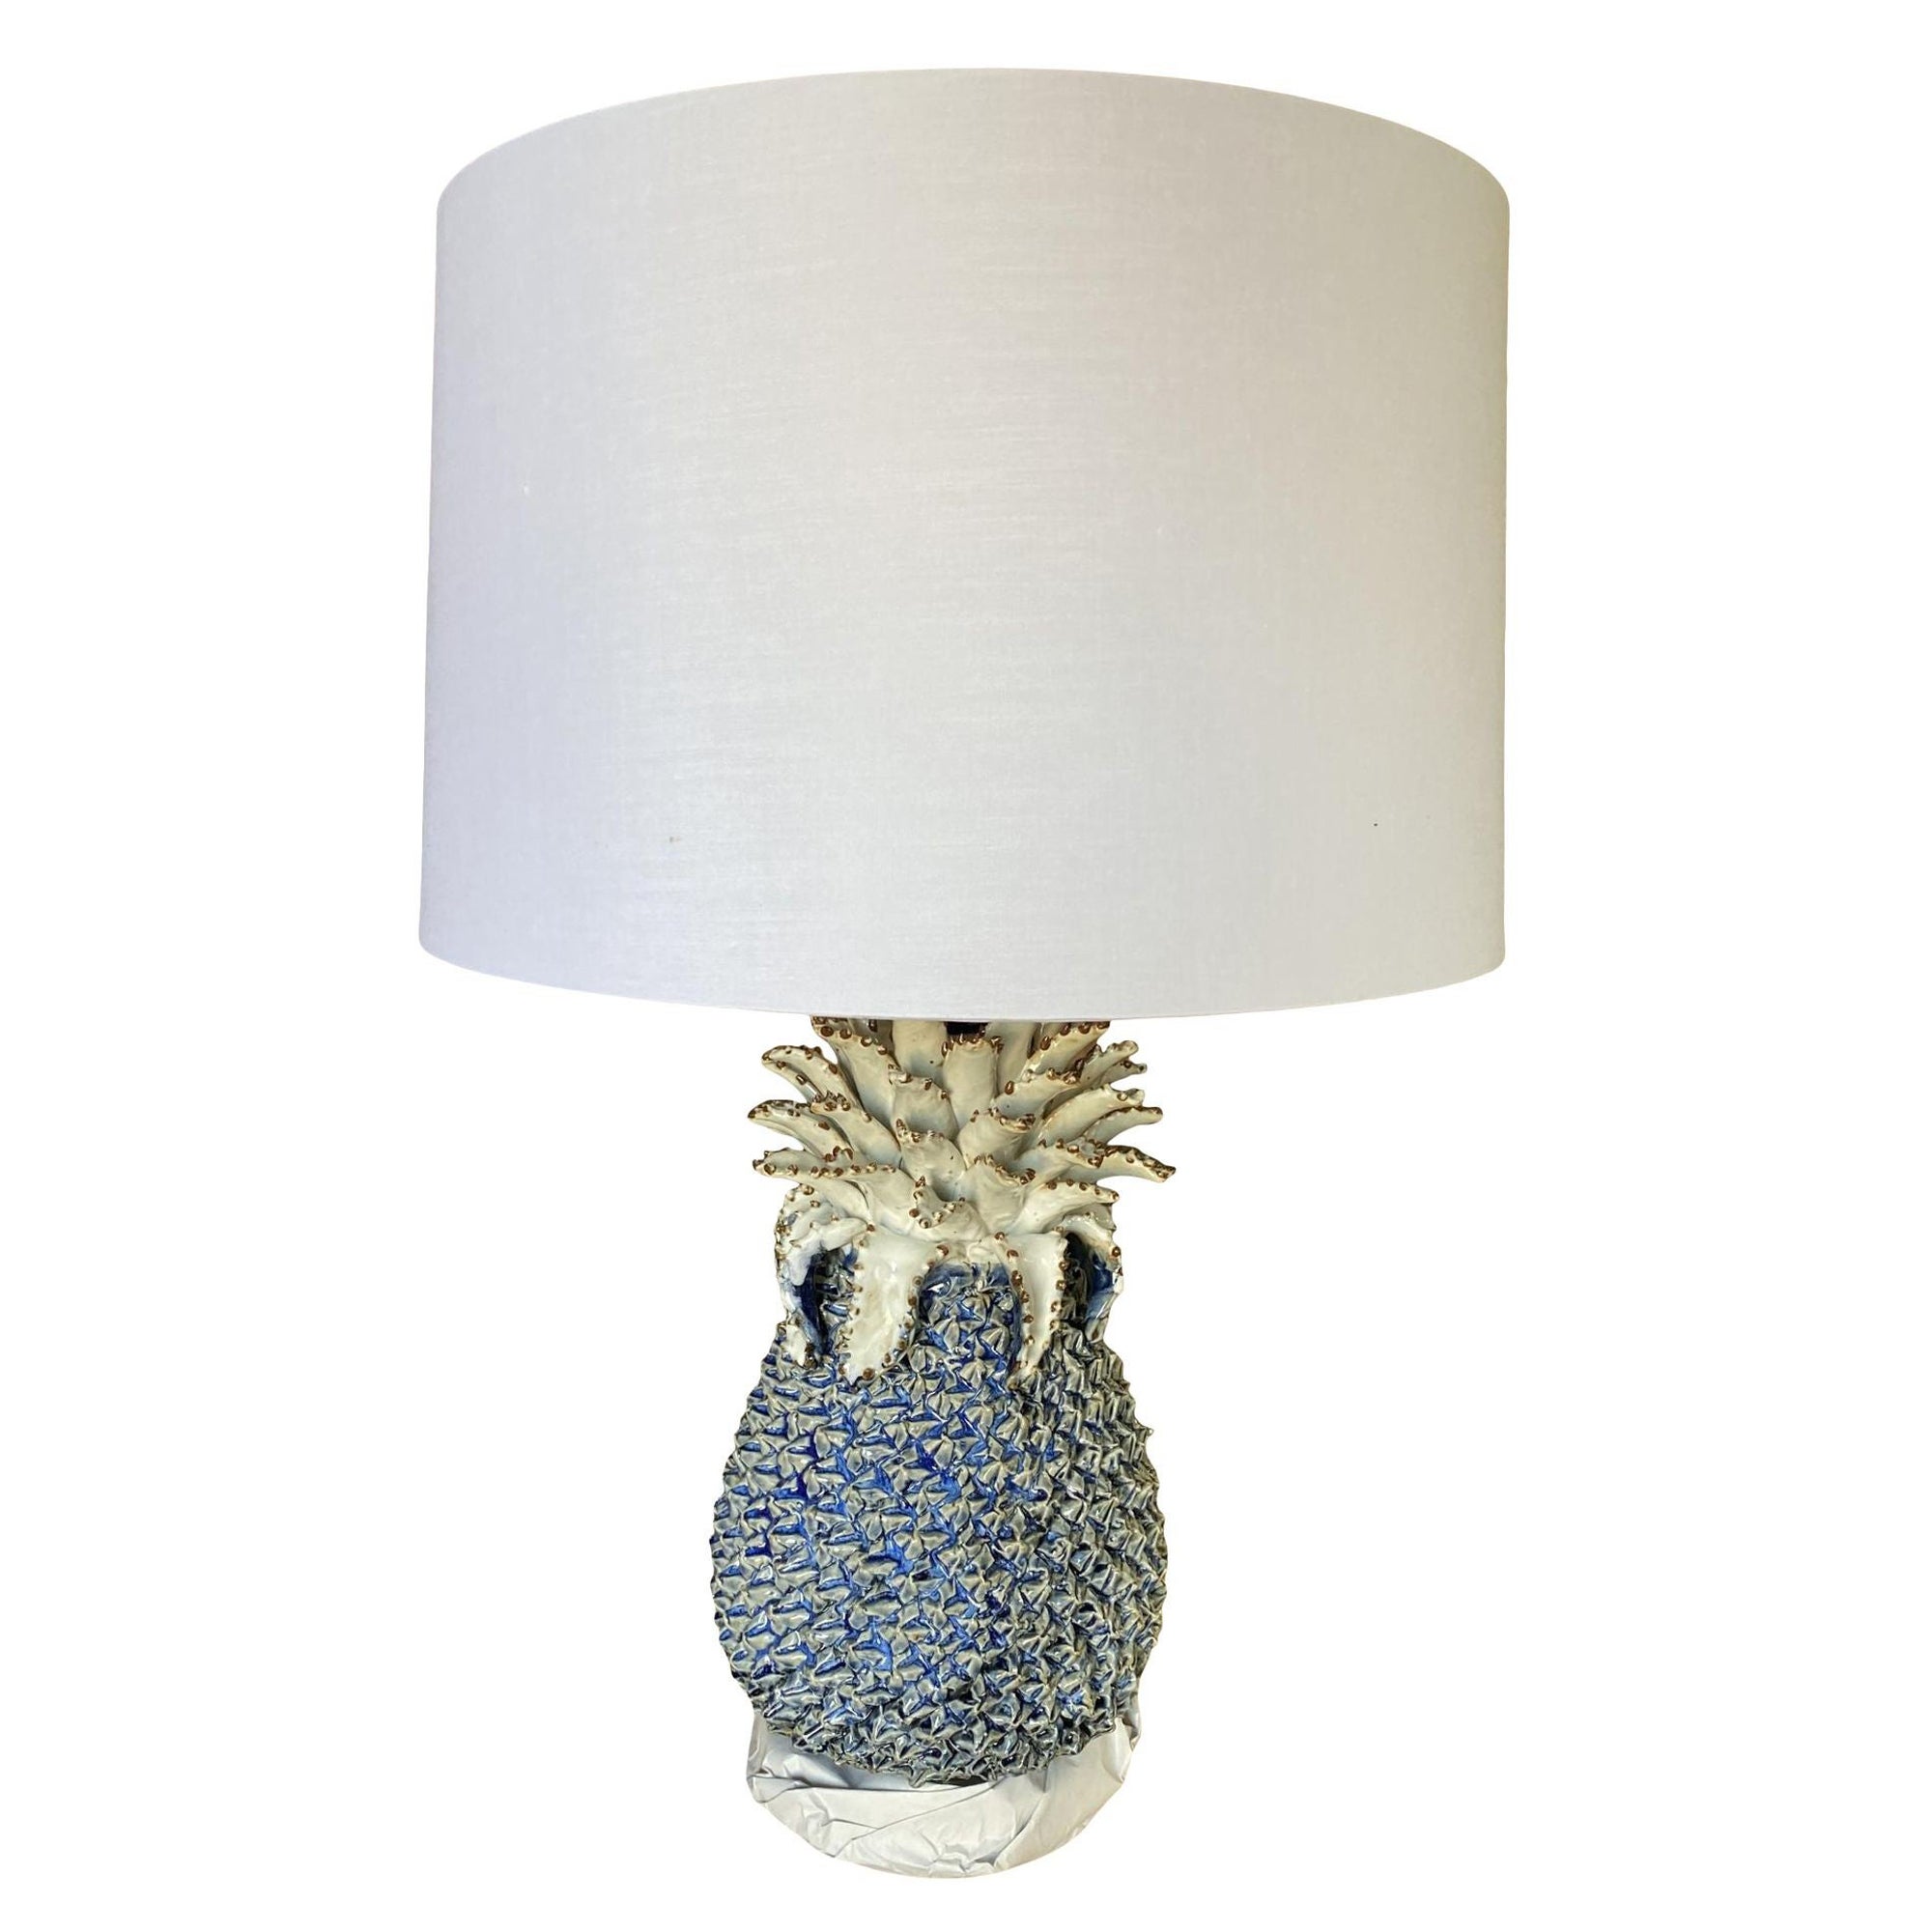 Modern Ceramic Pineapple Lamp With Large Shade W/ Shade For Sale